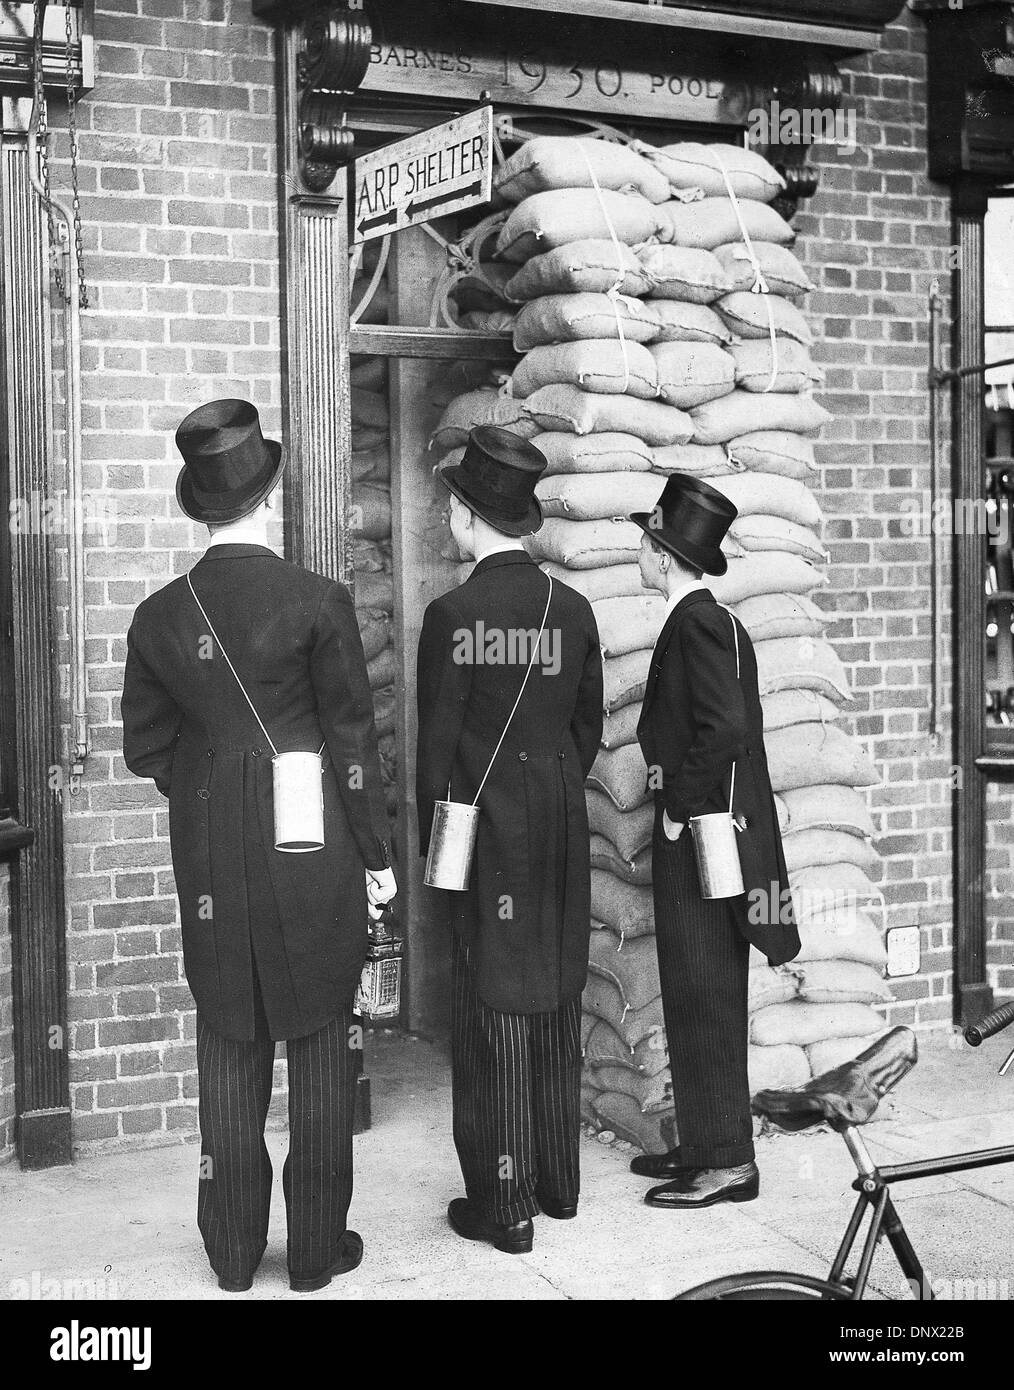 Sept. 21, 1939 - London, England, U.K. - Boys of Eton School find the place changed when they returned from their summer vacation in 1939. Here three boys, carrying gas masks, examine the sandbagged entrance to an air raid shelter. (Credit Image: © KEYSTONE Pictures USA/ZUMAPRESS.com) Stock Photo